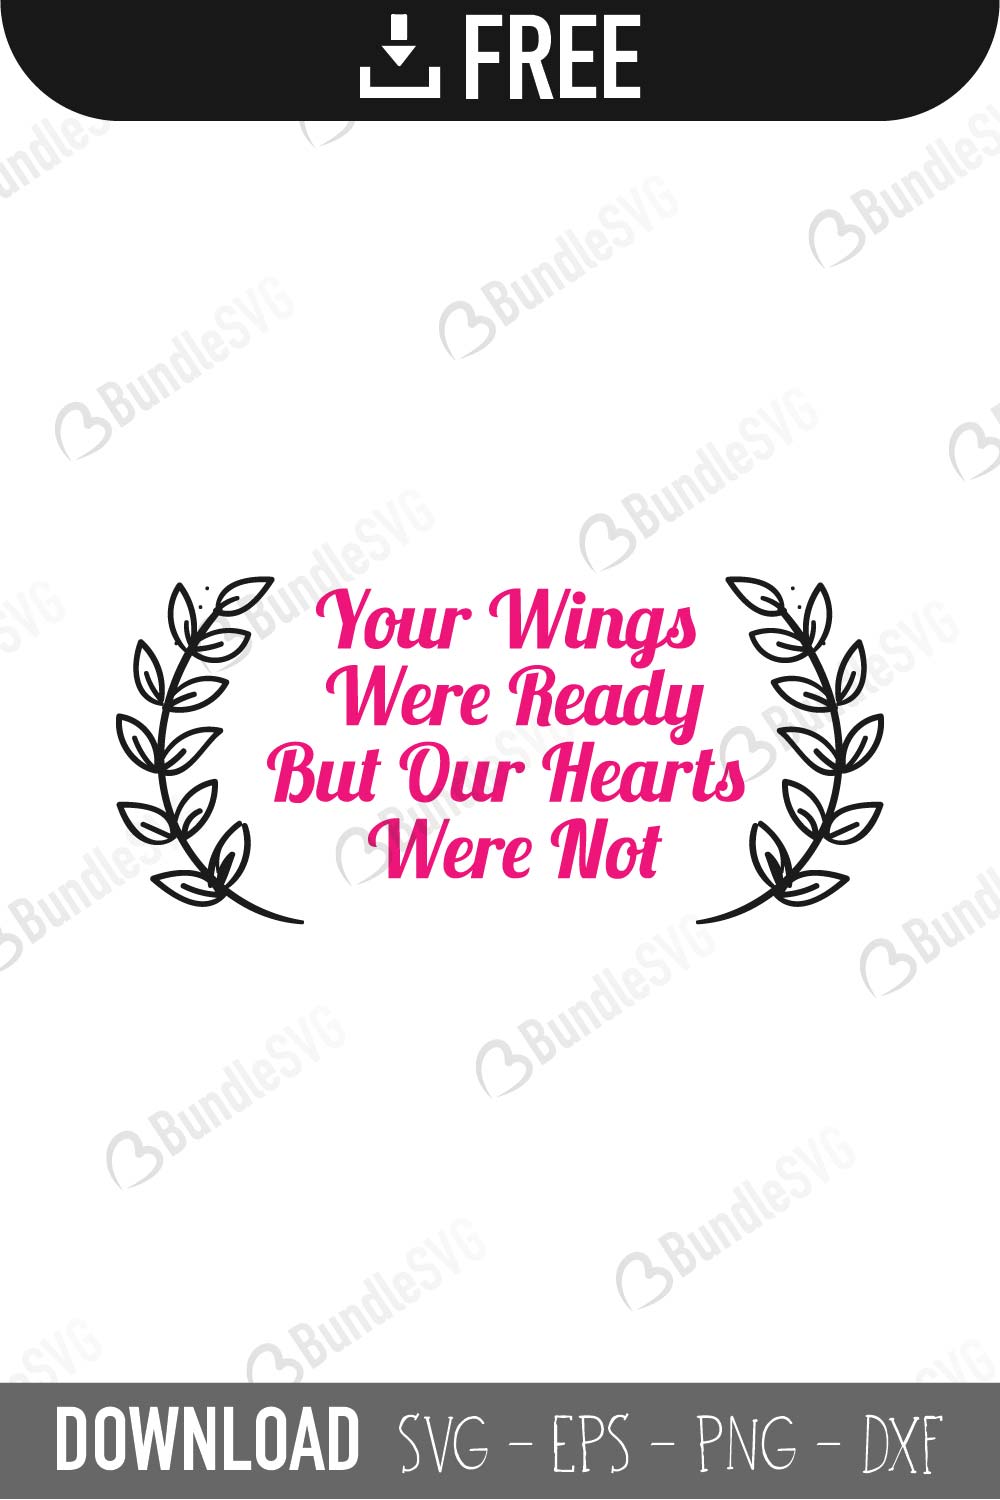 Download Wings Were Ready Svg Svg Files For Cricut Machines Cricut Files Silhouette Files Instant Download Svg Free Svg File Free Png File PSD Mockup Templates